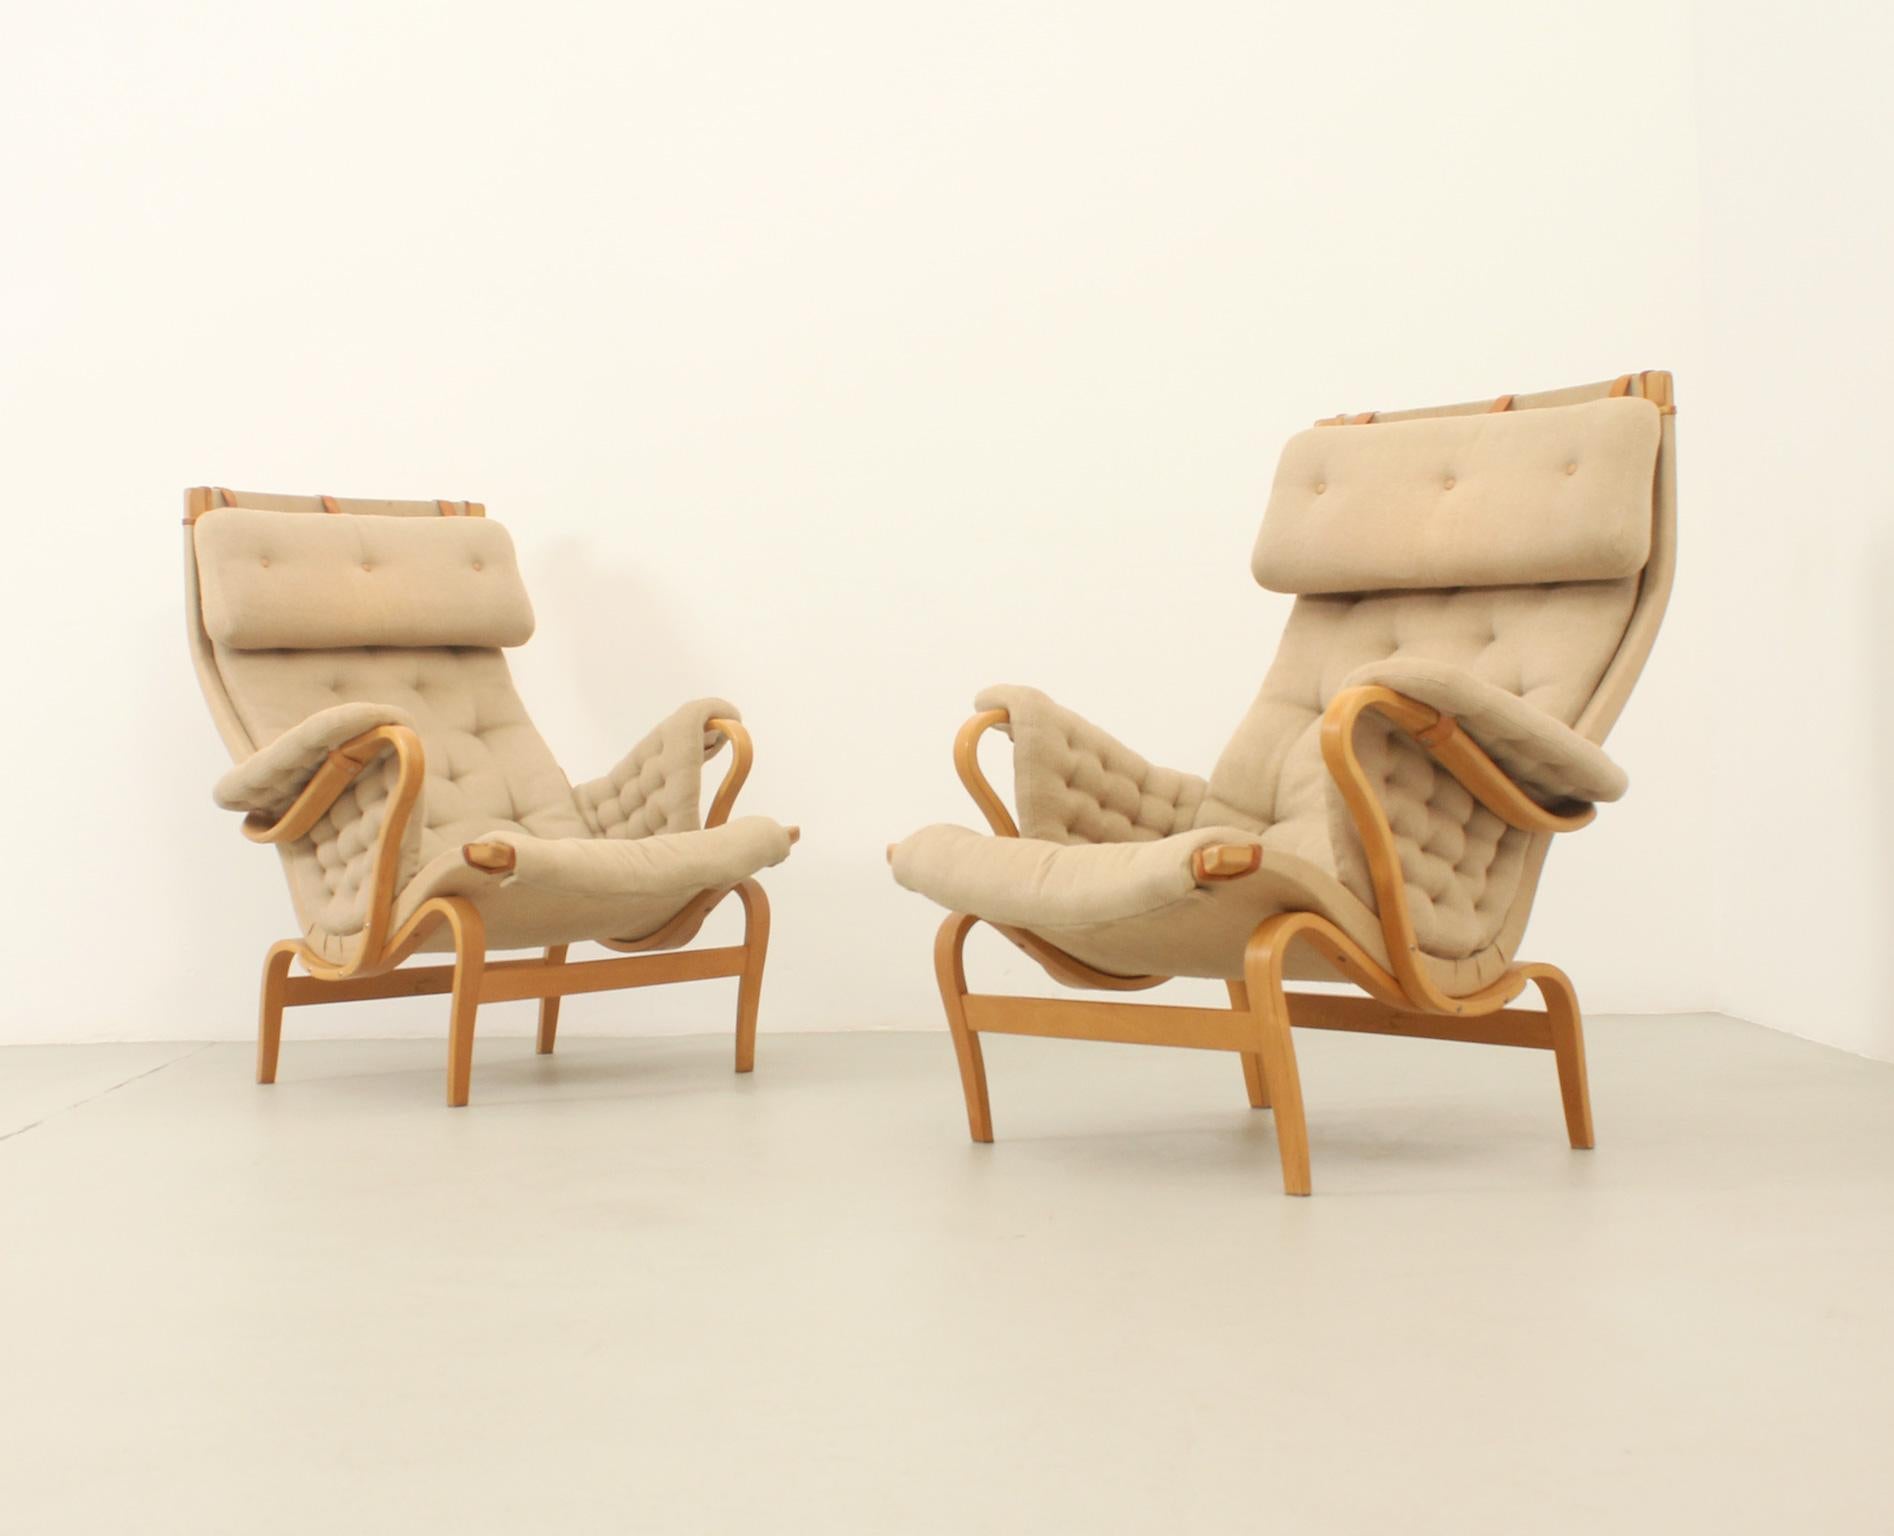 Pair of Pernilla armchairs designed in 1969 by Bruno Mathsson for Dux, Sweden. Curved beech wood structure with canvas, leather strips and original fabric. Signed. 